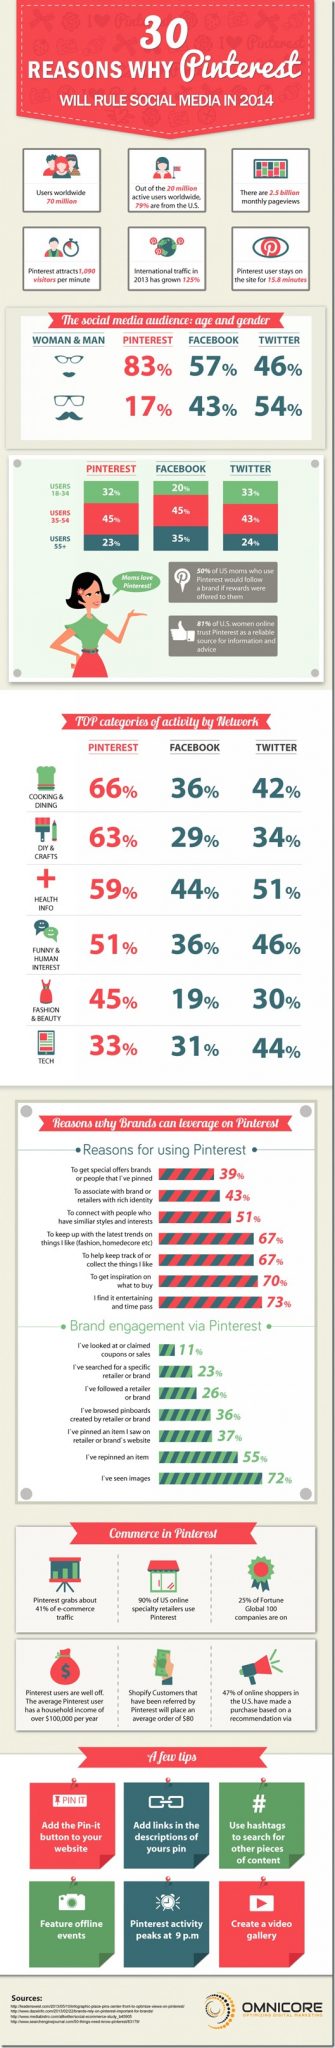 Reasons-to-market-your-business-on-pinterest-in-2014-larger-view